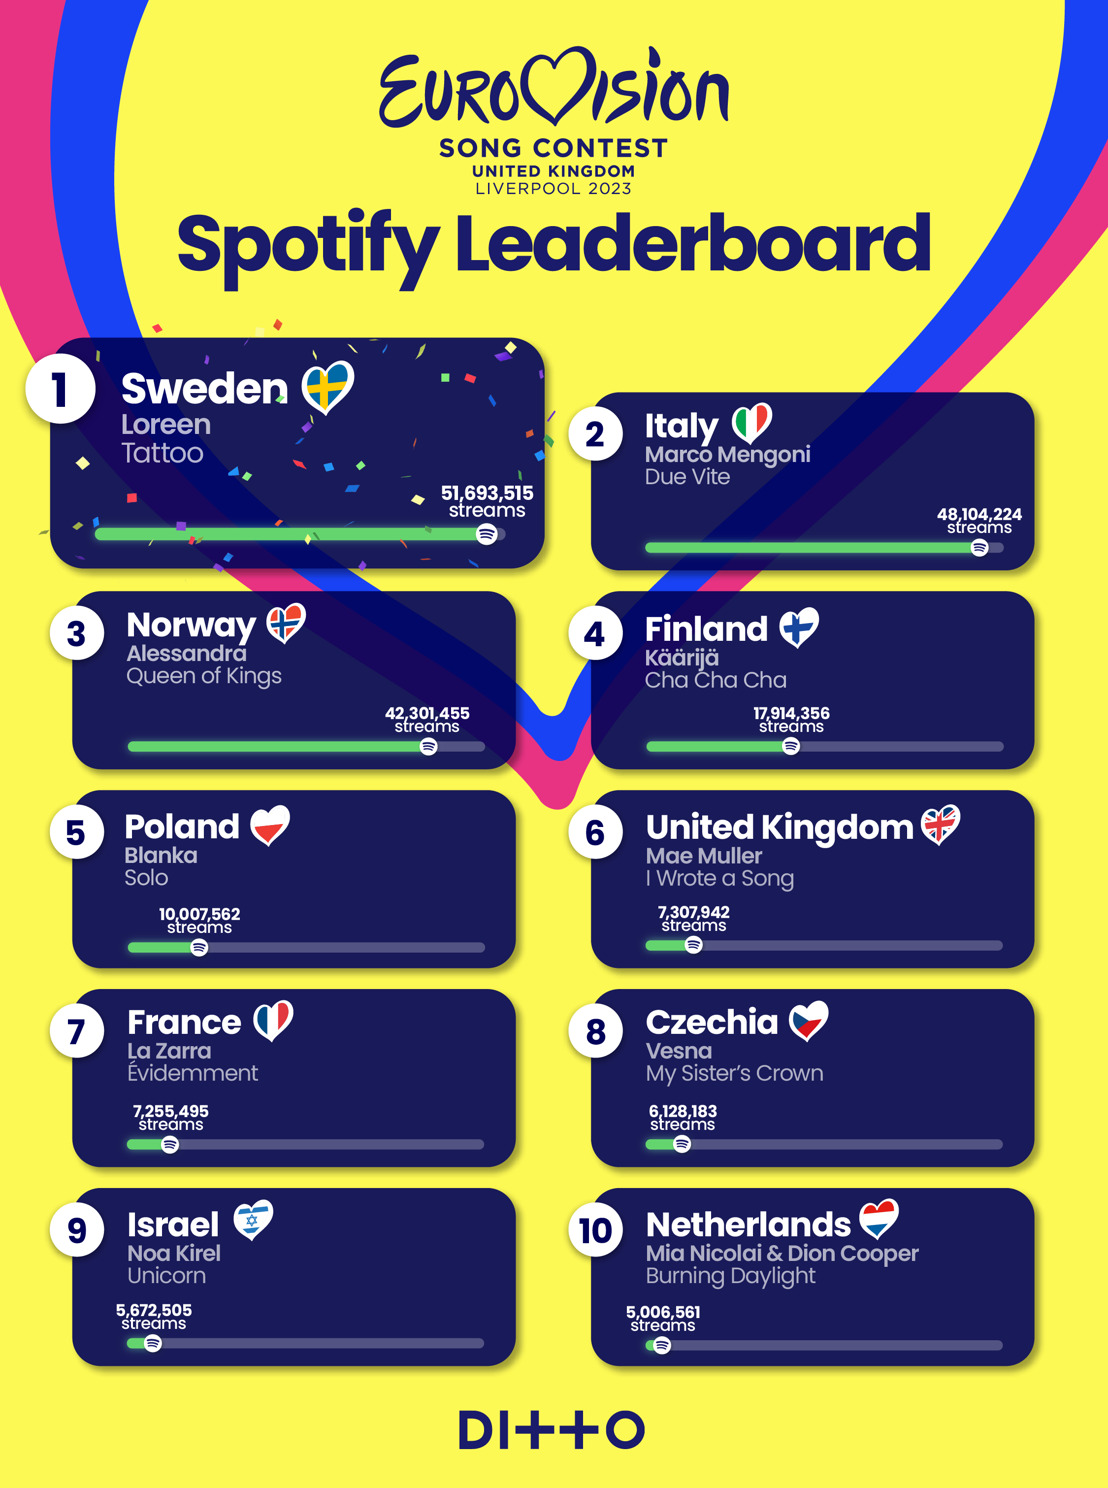 Sweden will win Eurovision Song Contest 2023 (and UK finish 6th) according to Spotify streams.